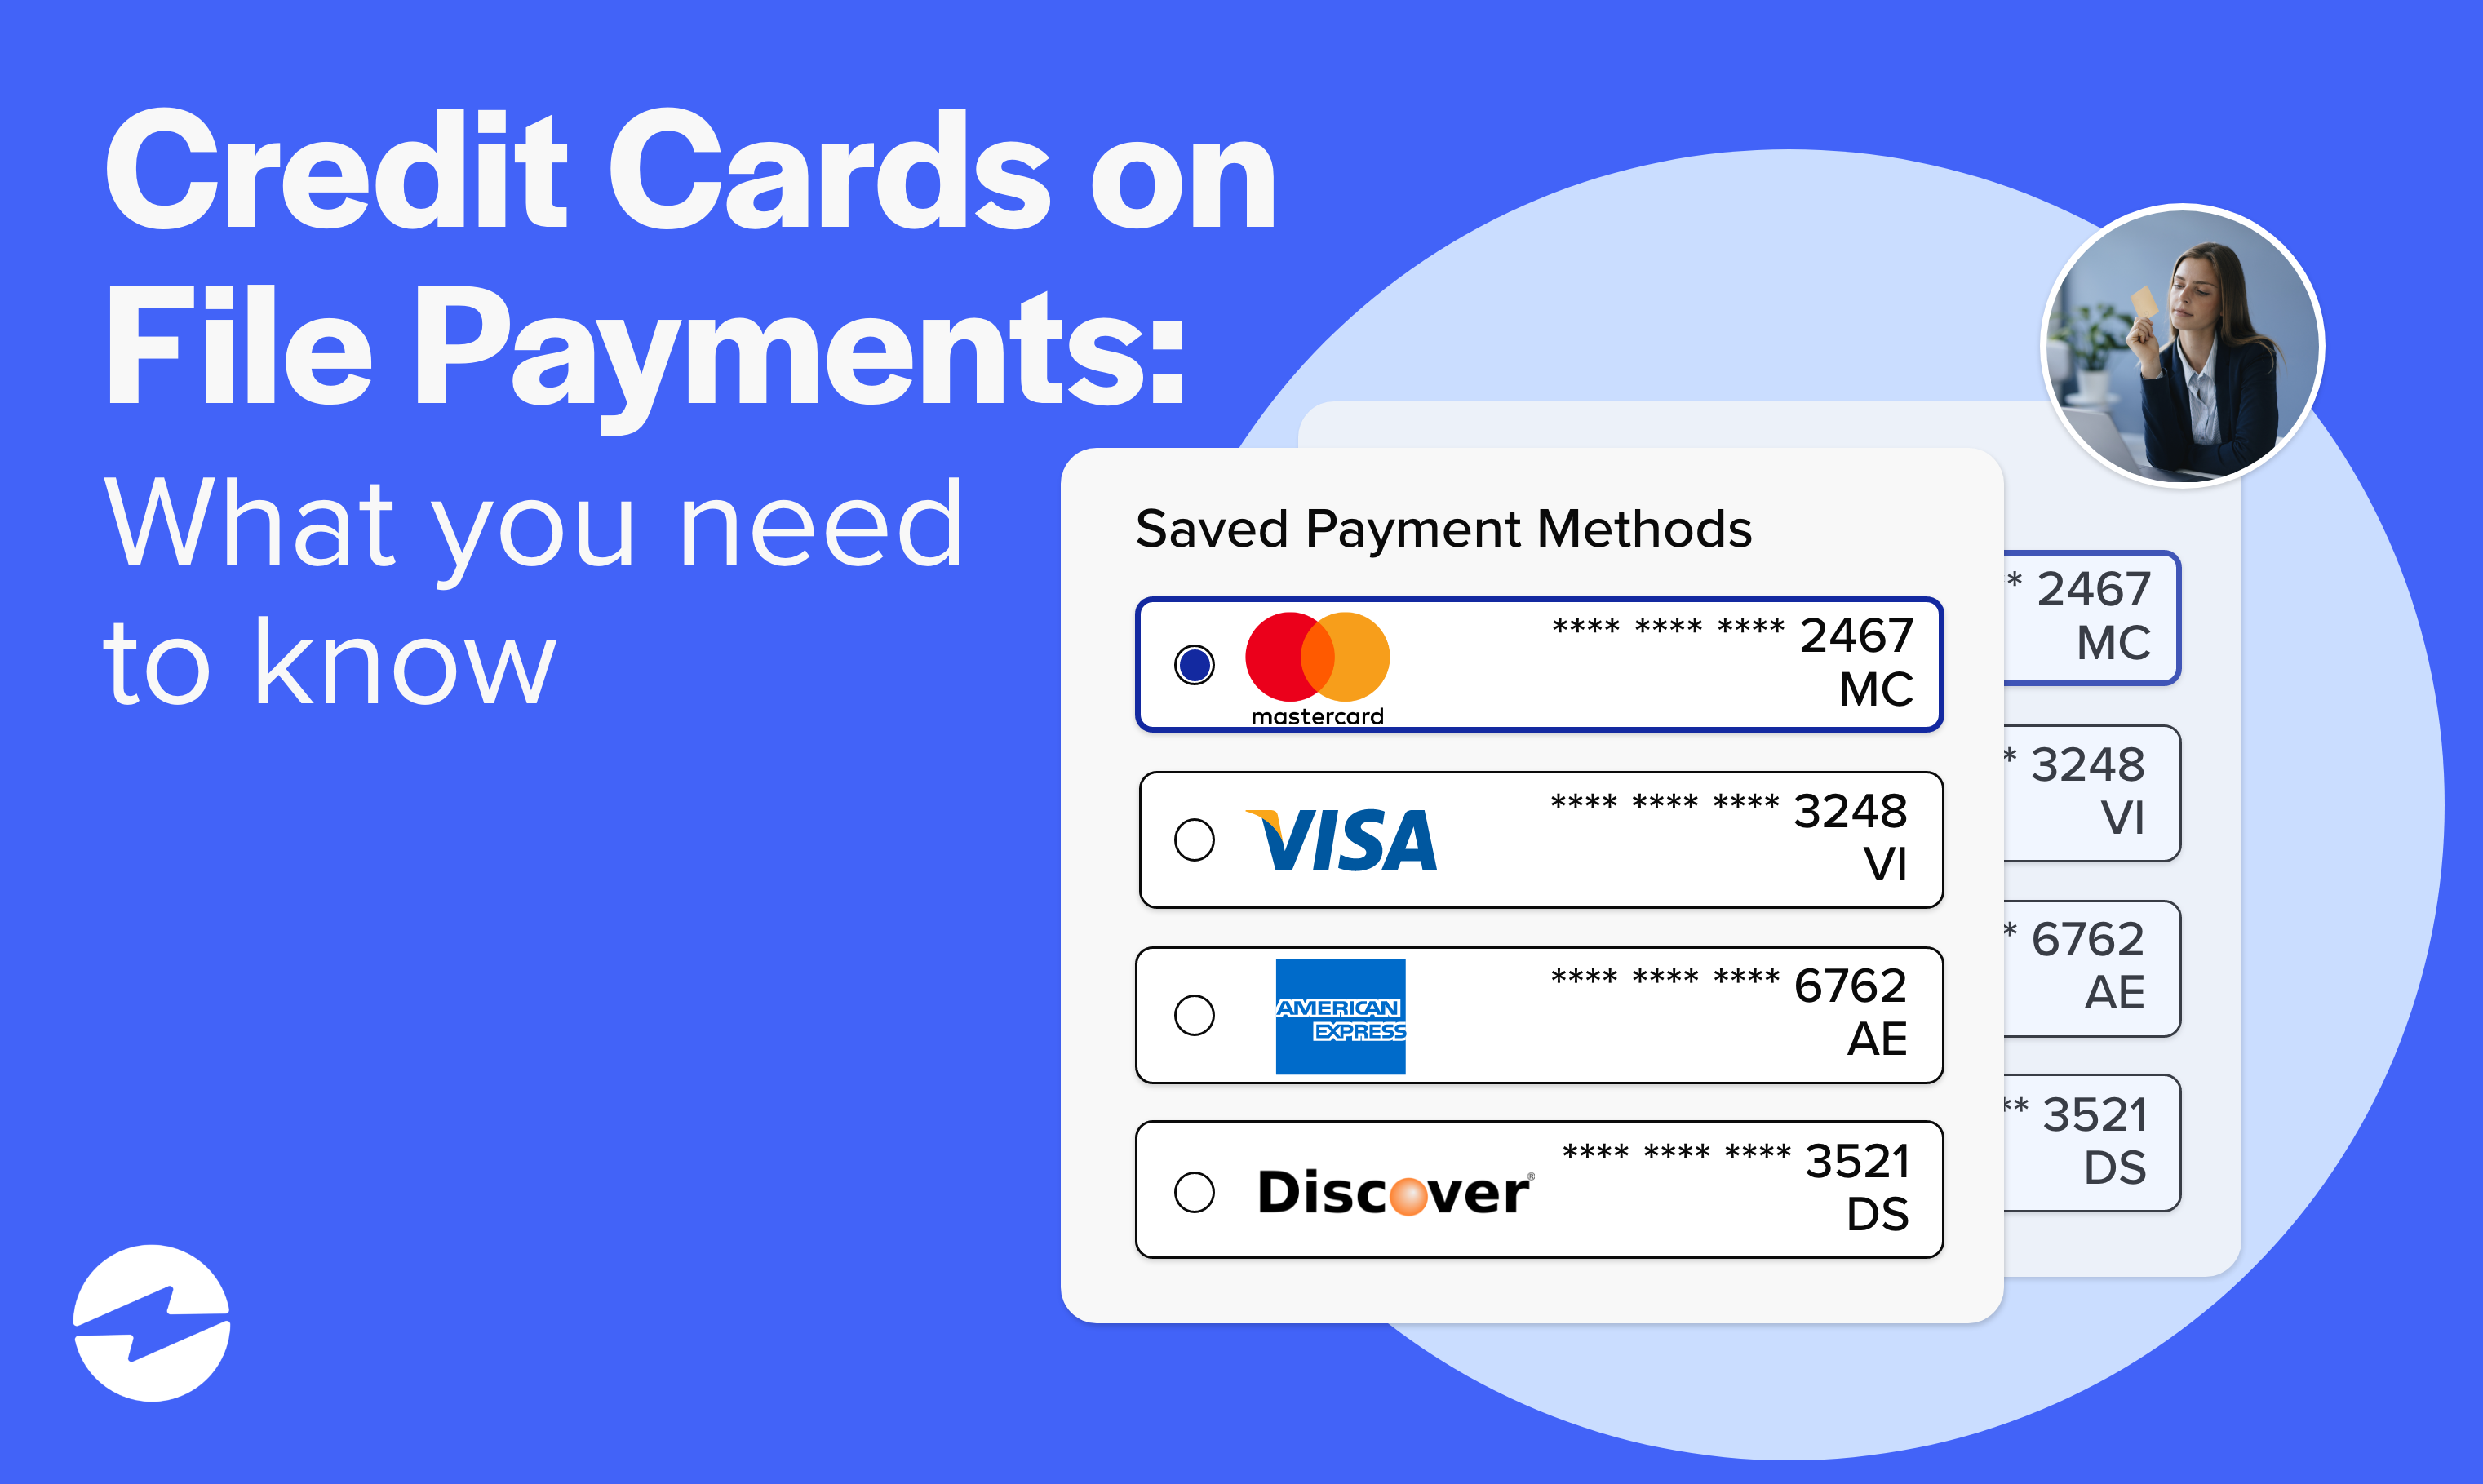 What You Need To Know About Credit Cards on File Payments